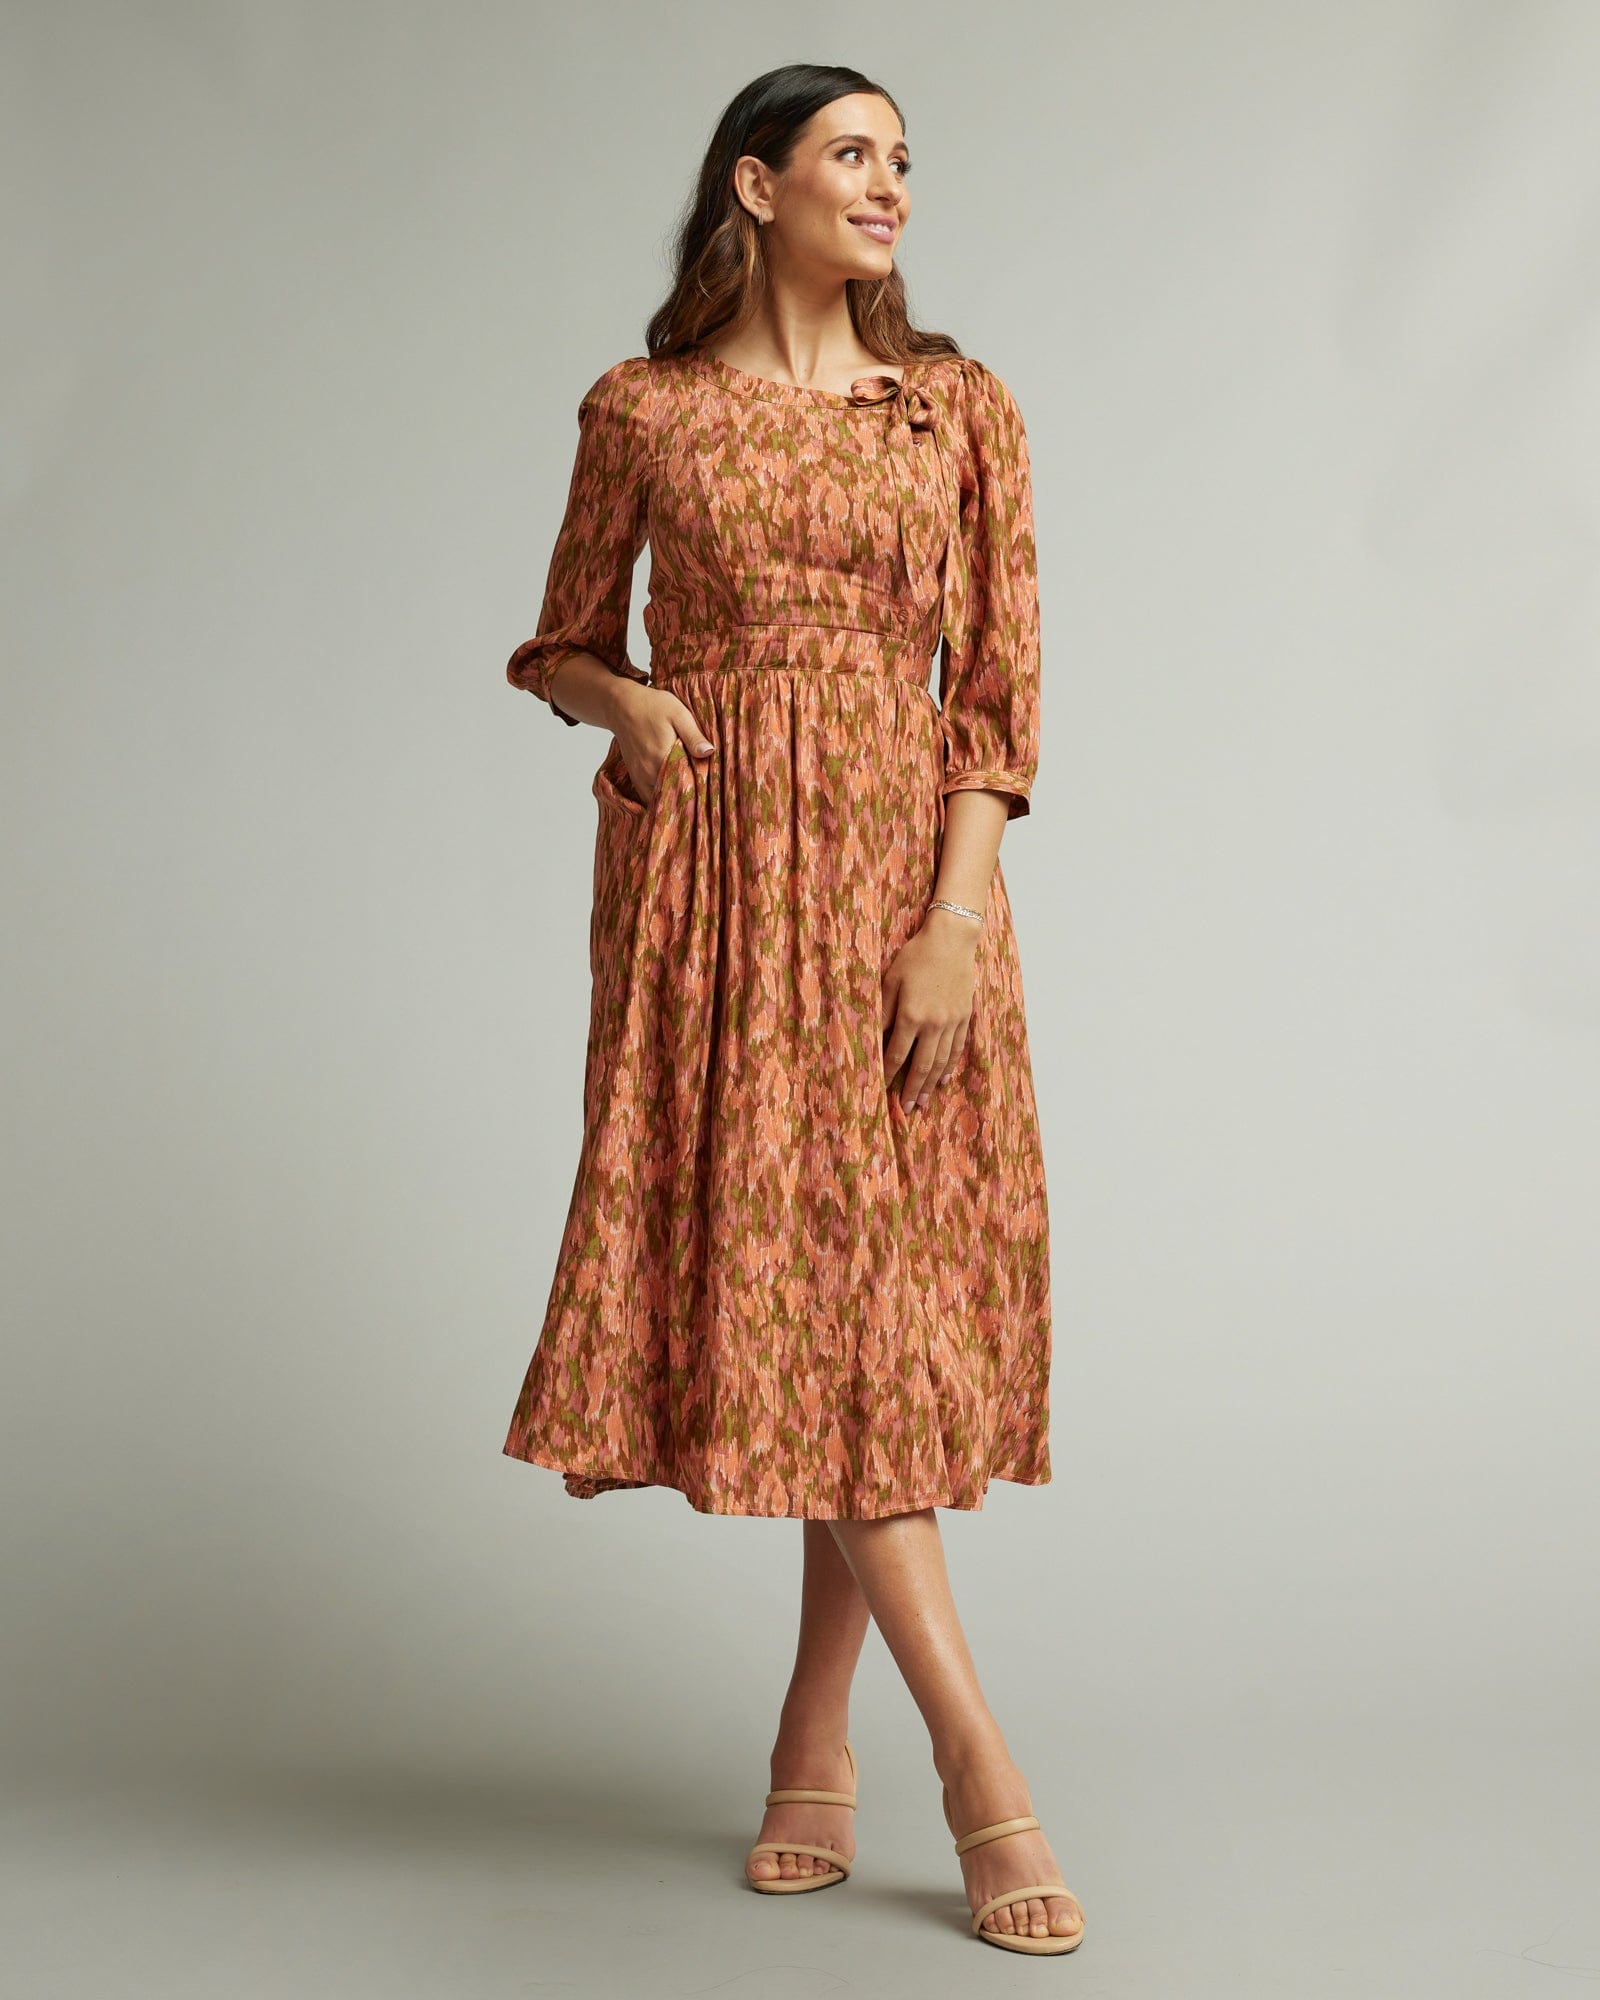 Woman in a 3/4 length sleeve, midi-length dress in orange and brown.